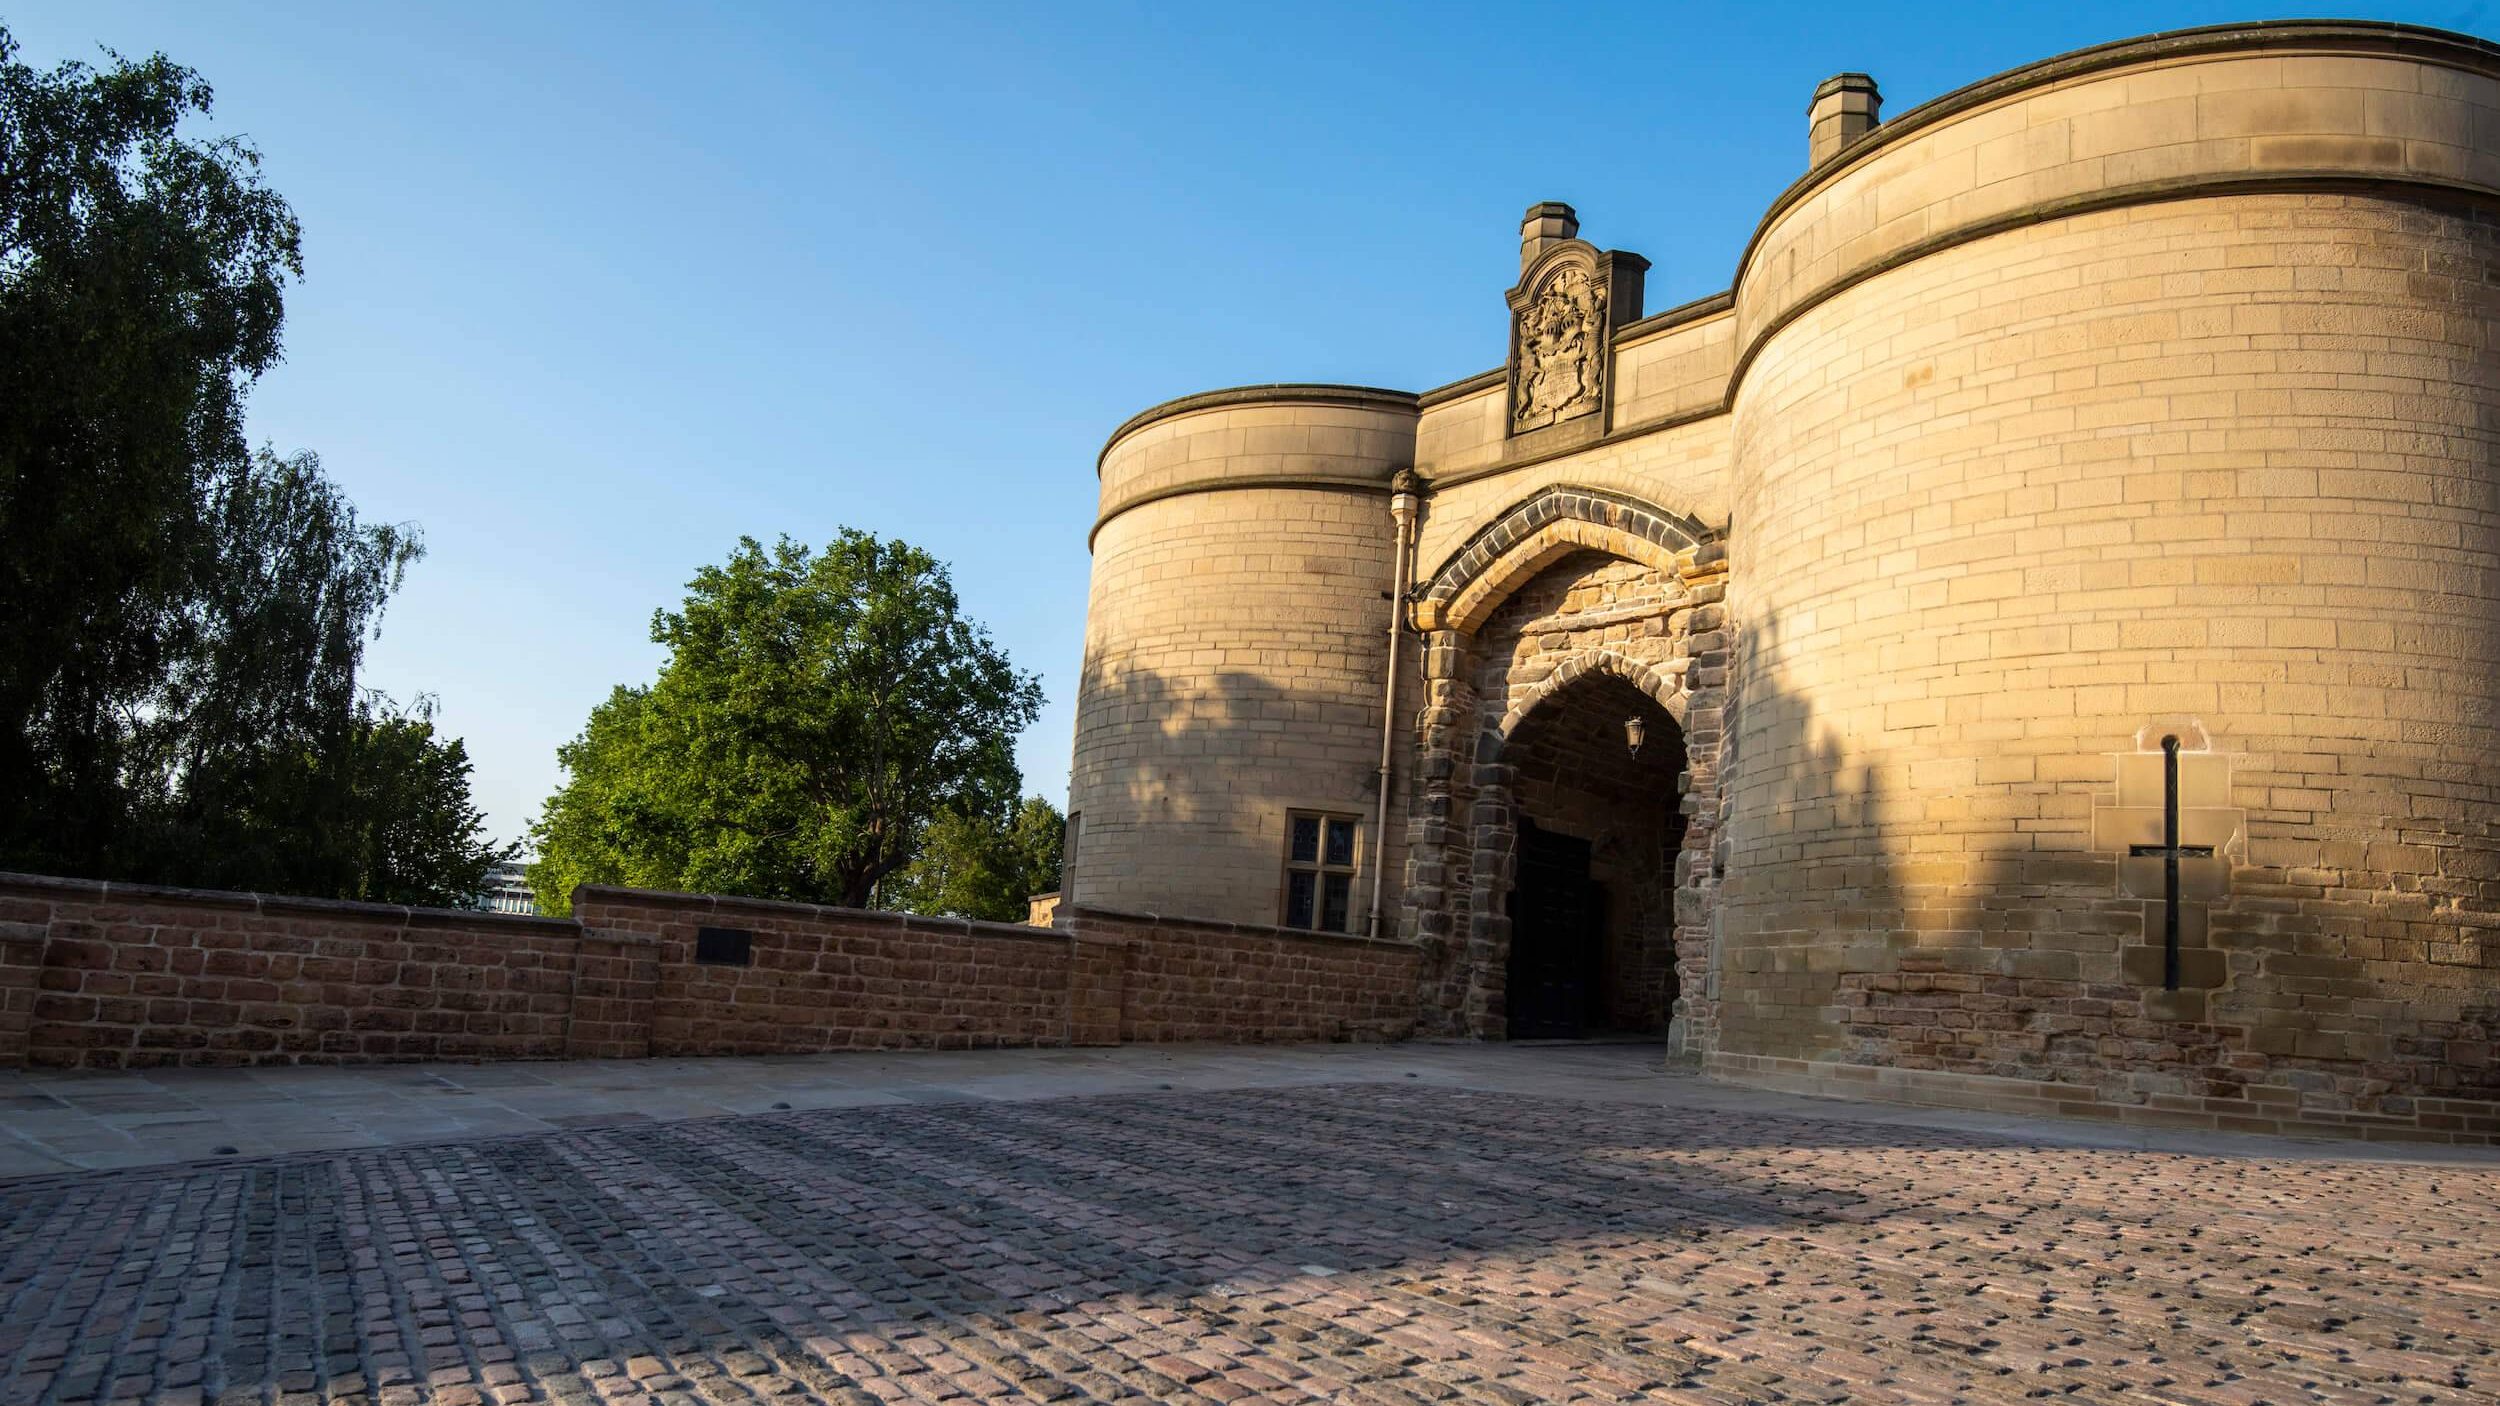 The incident took place at Nottingham Castle in August 2021